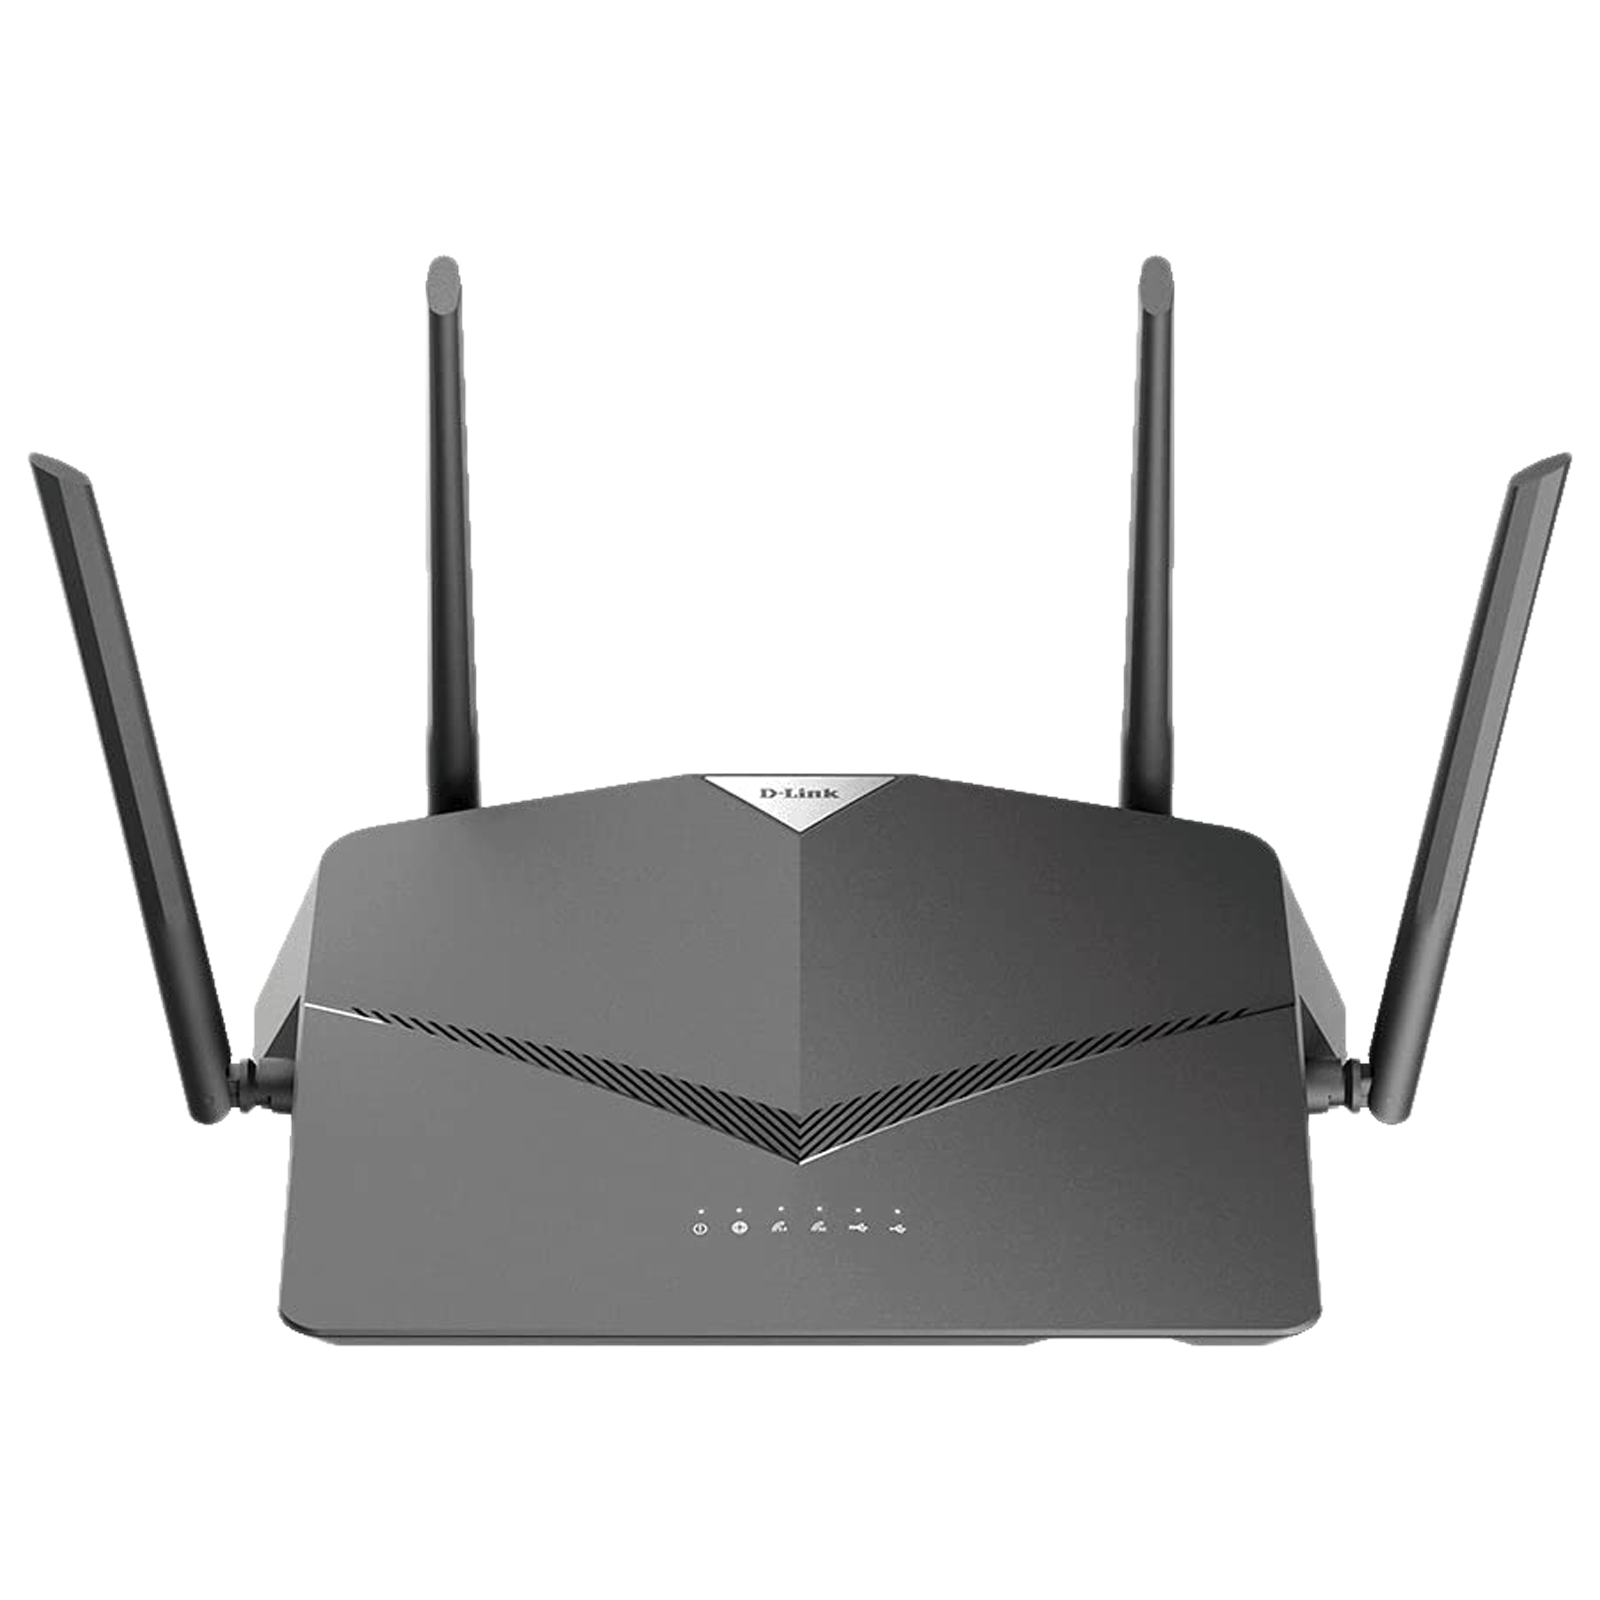 D-Link DIR-2640 Dual Band 2600 Mbps WiFi Router (4 Antennas, 3 LAN Ports, MIMO Supported, Black)_1